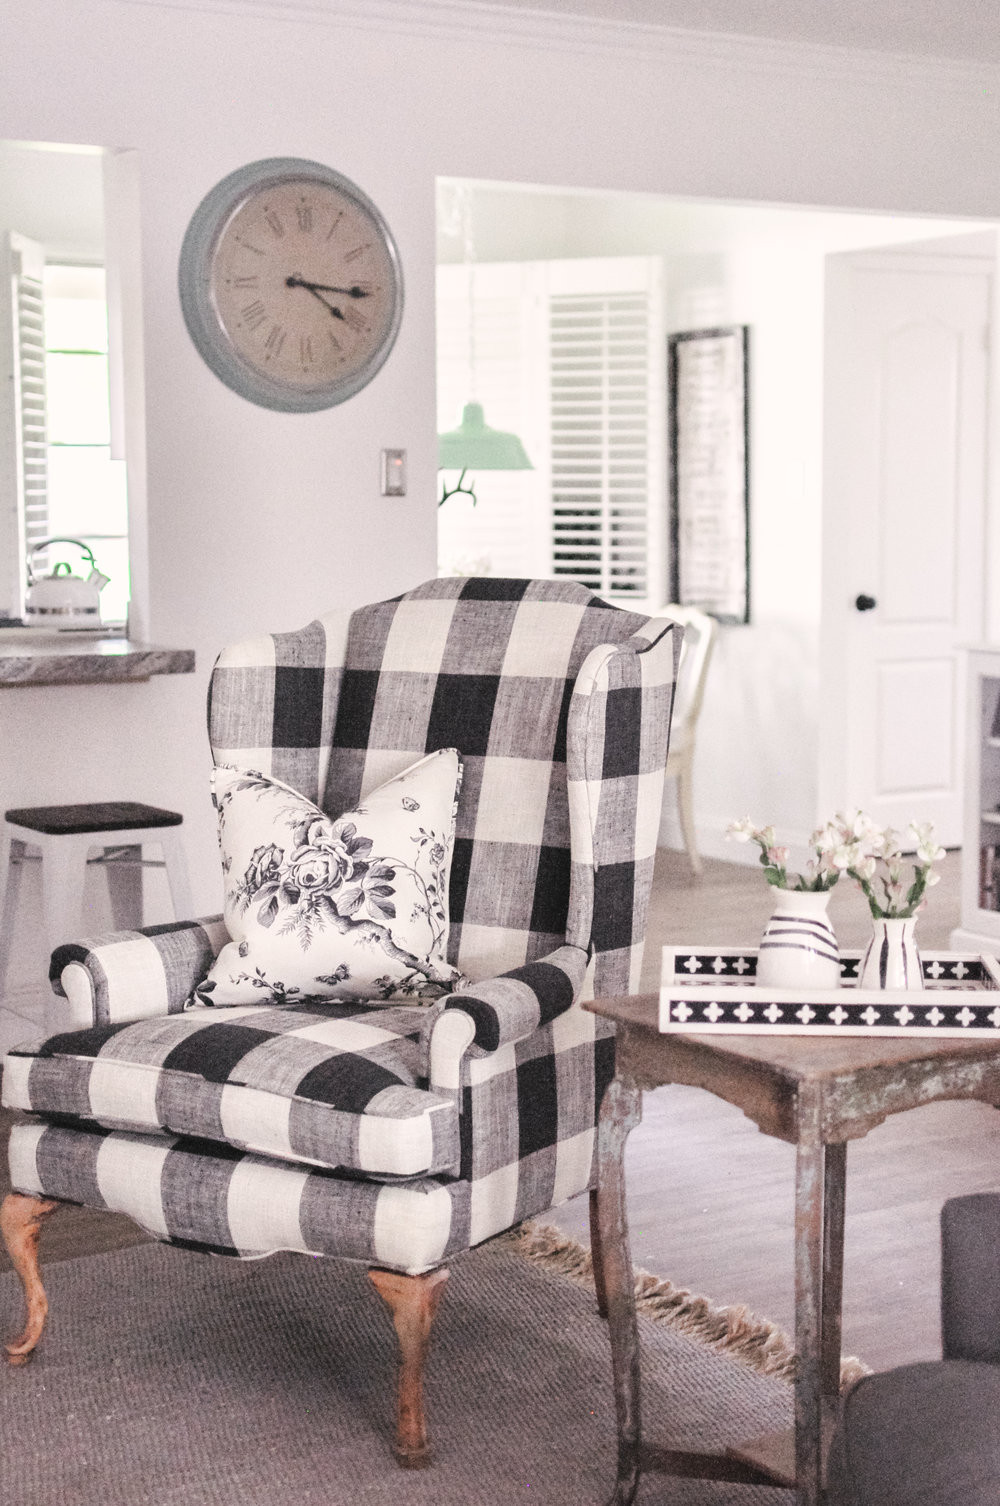 Farmhouse Living Room Chairs
 Farmhouse Living Room Makeover Home Decor Love and Specs